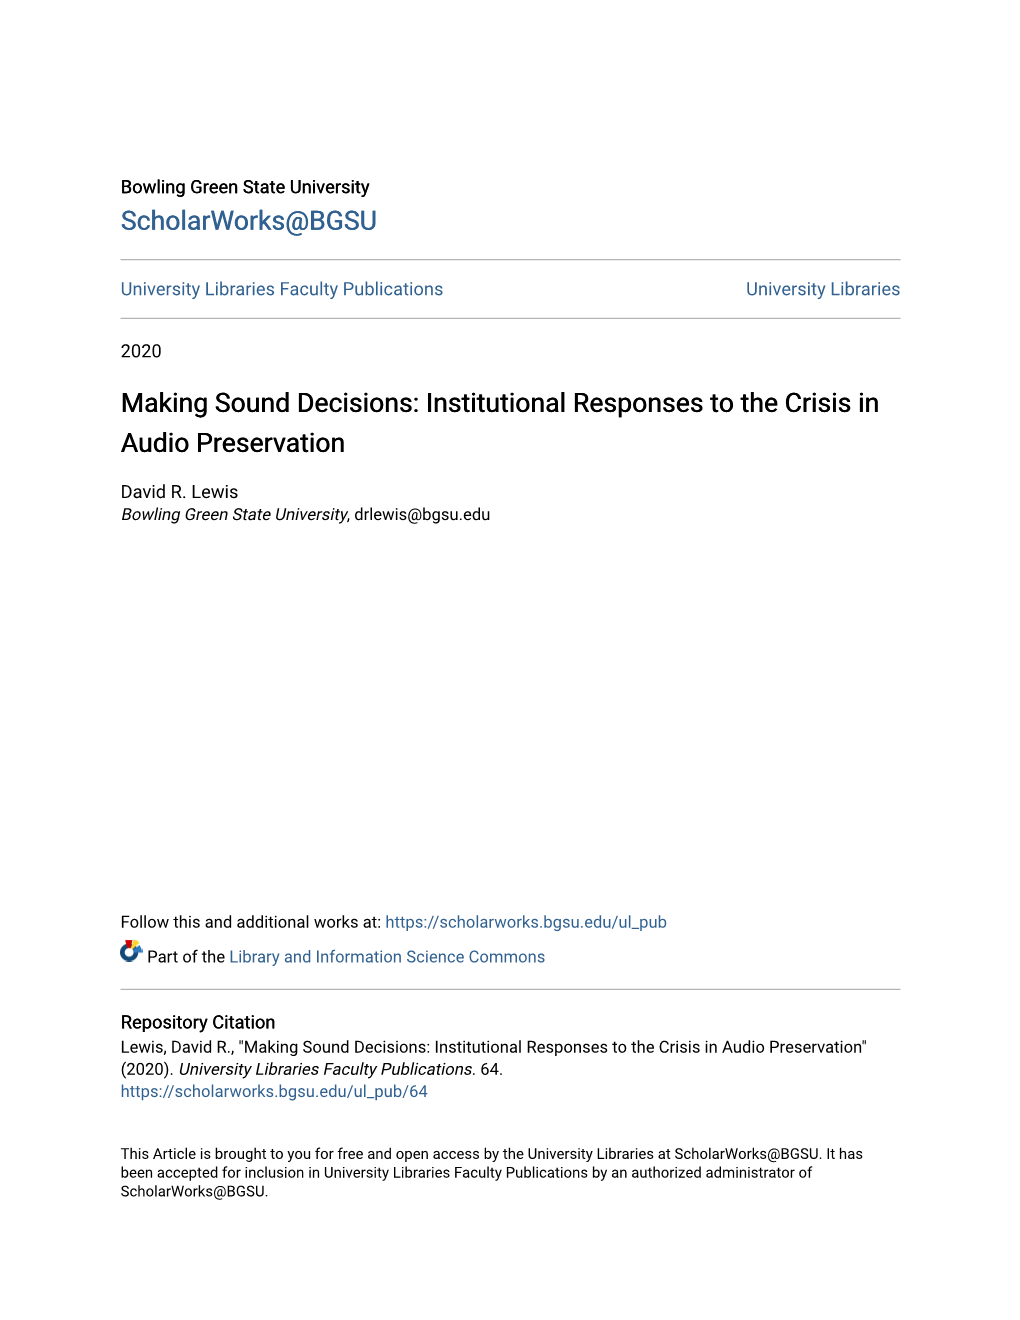 Institutional Responses to the Crisis in Audio Preservation